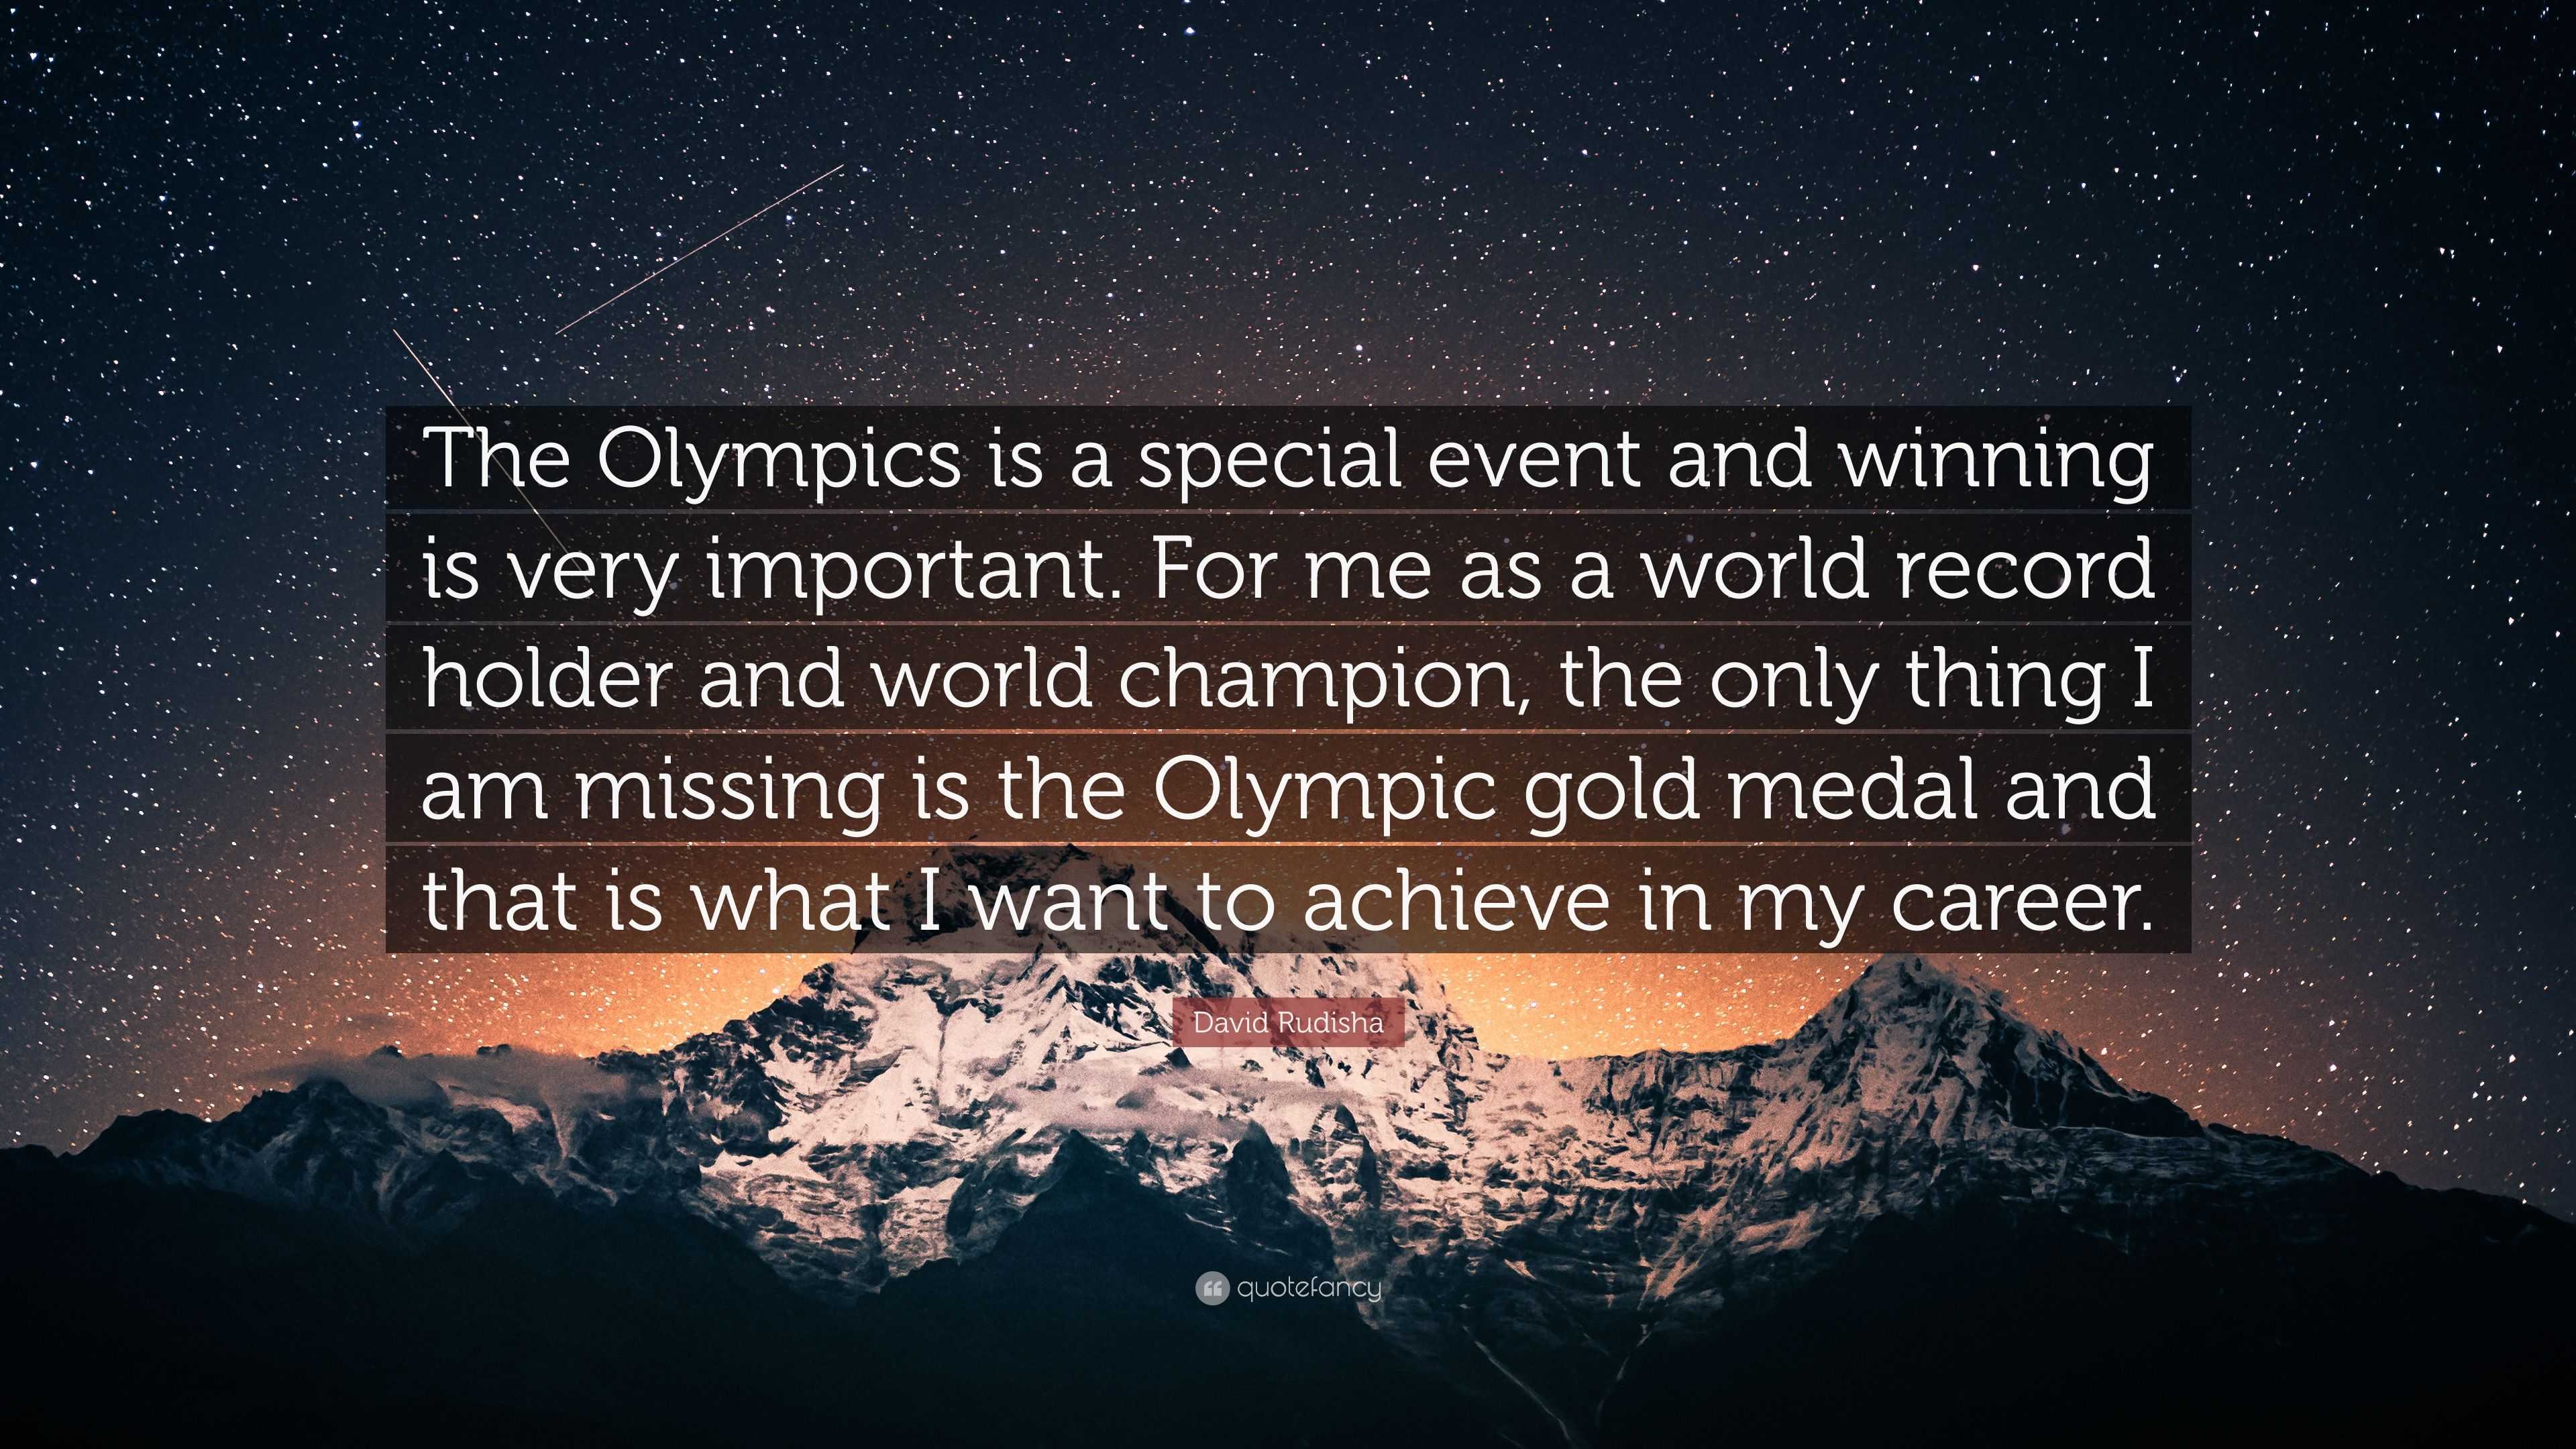 David Rudisha Quote “The Olympics is a special event and winning is